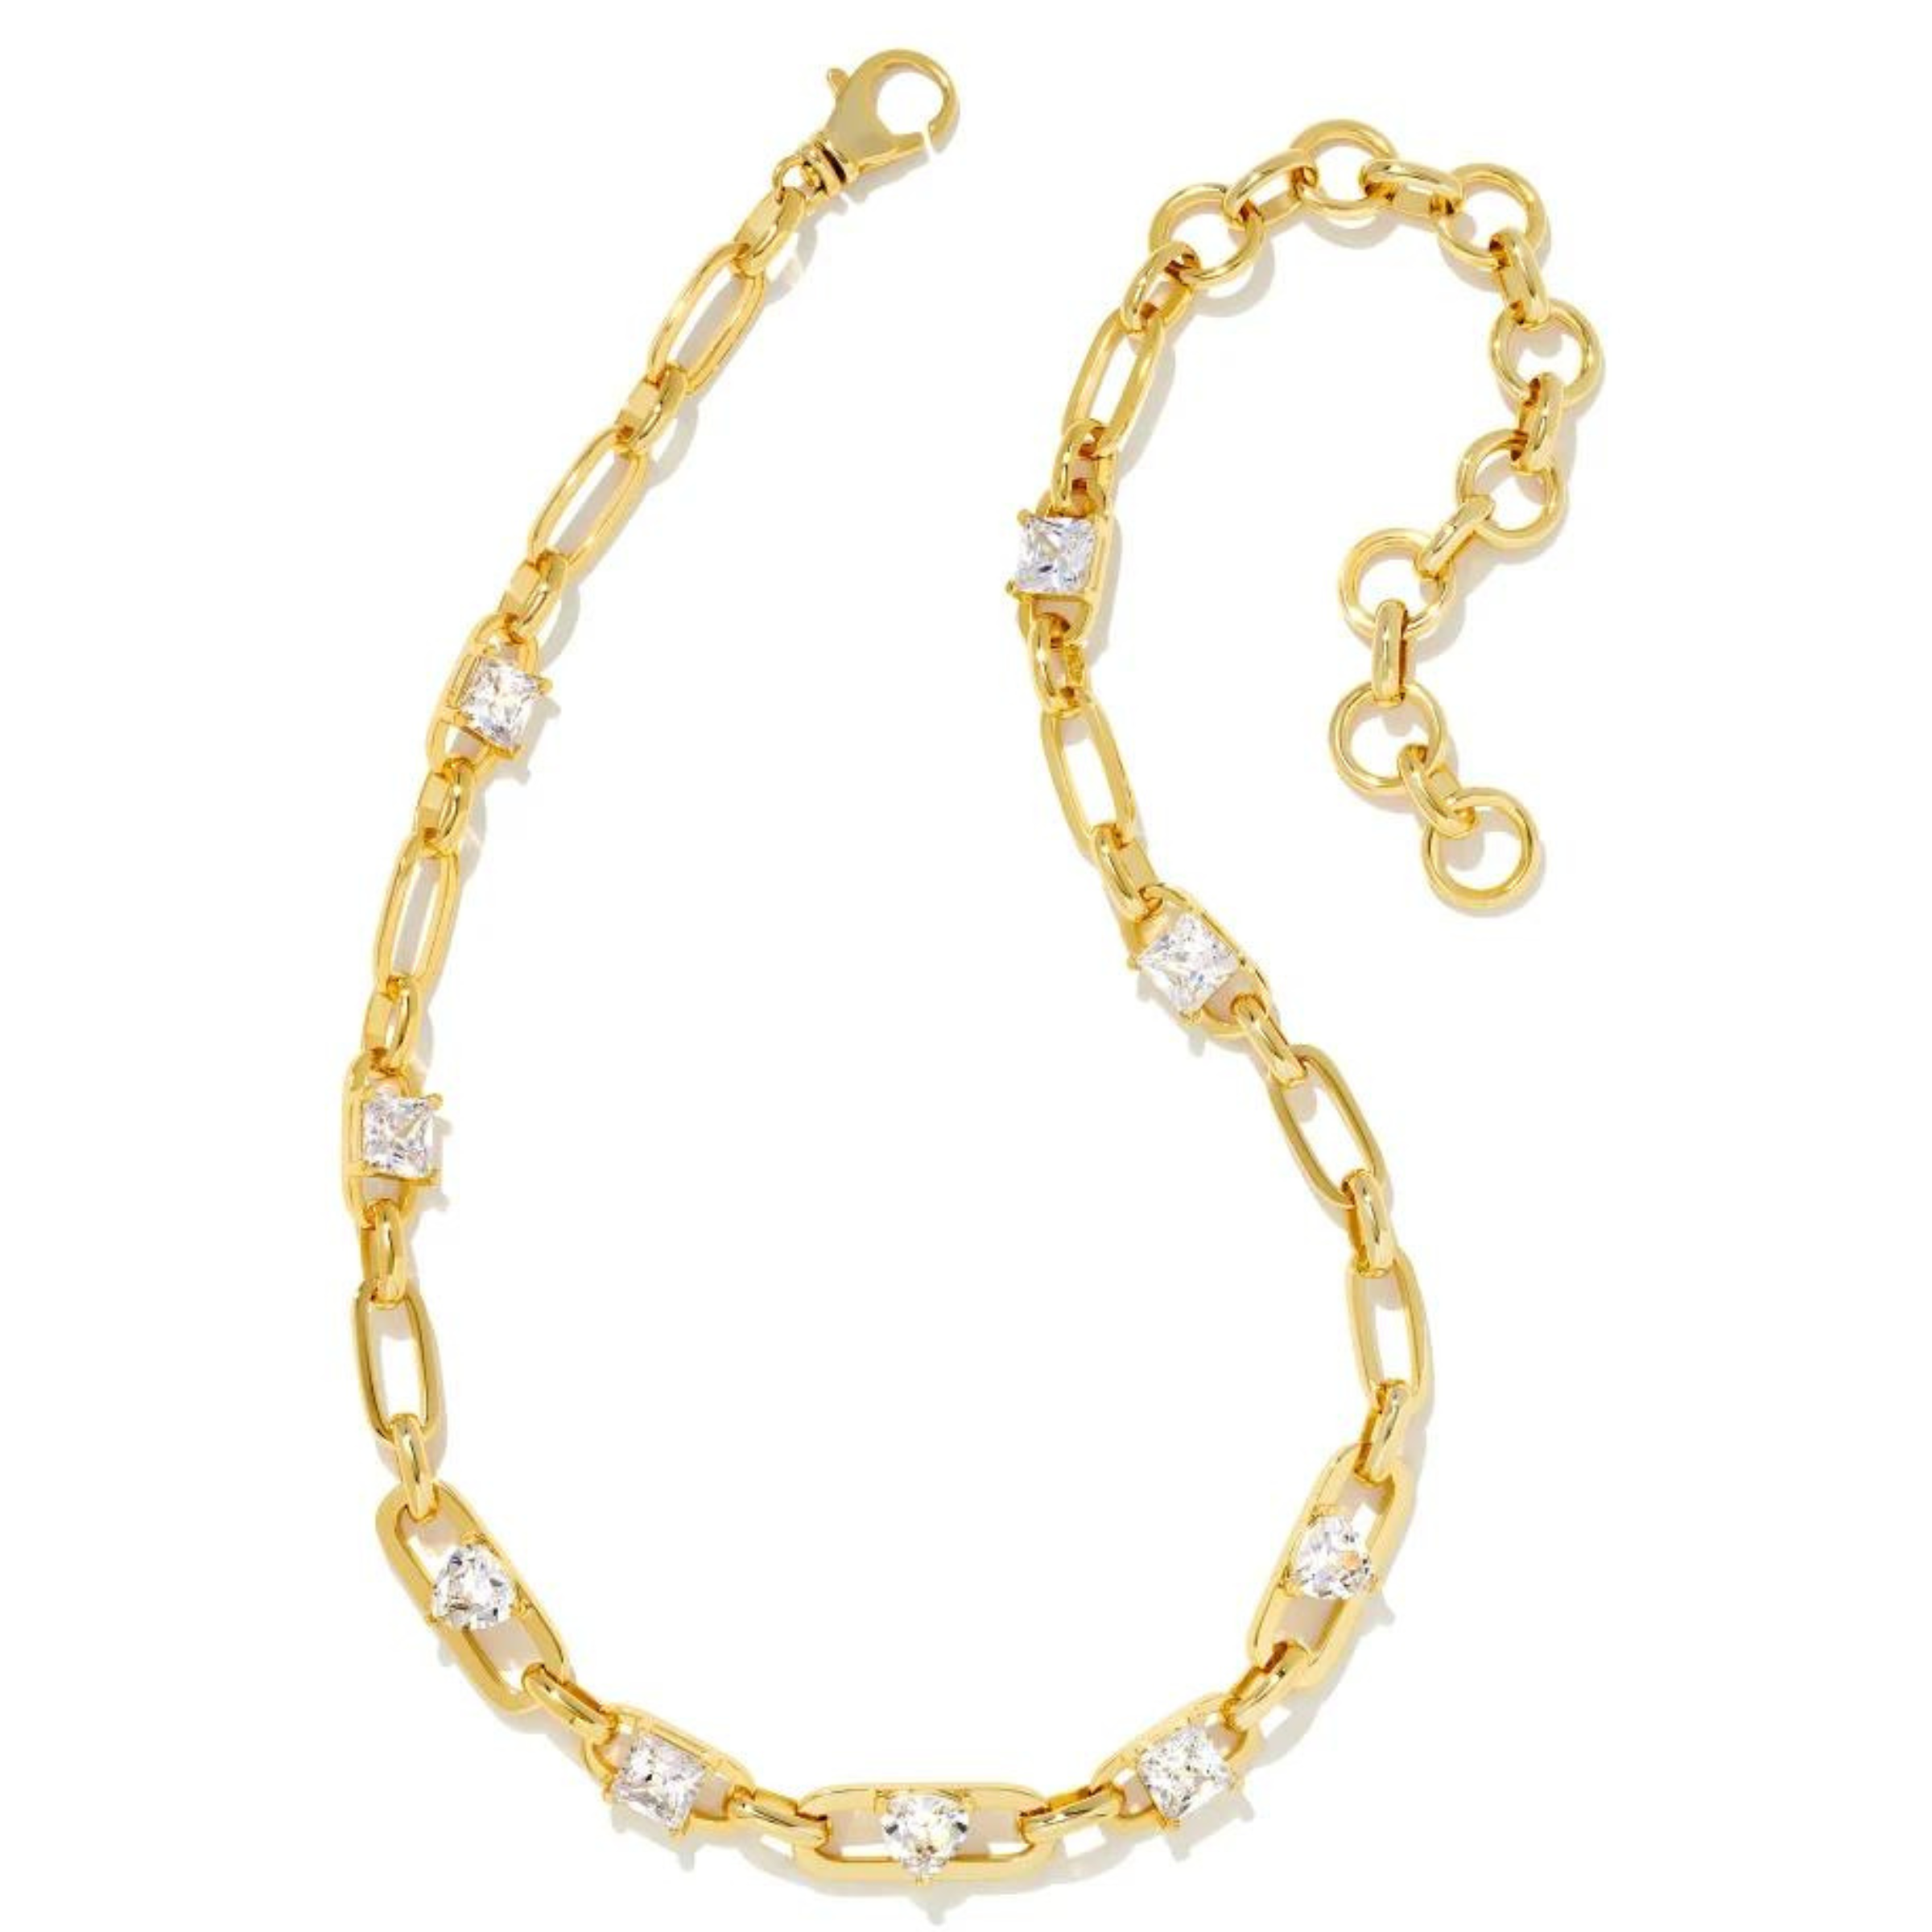 Gold chain necklace with different shaped clear crystals throughout the necklace. This necklace is pictured on a white background. 